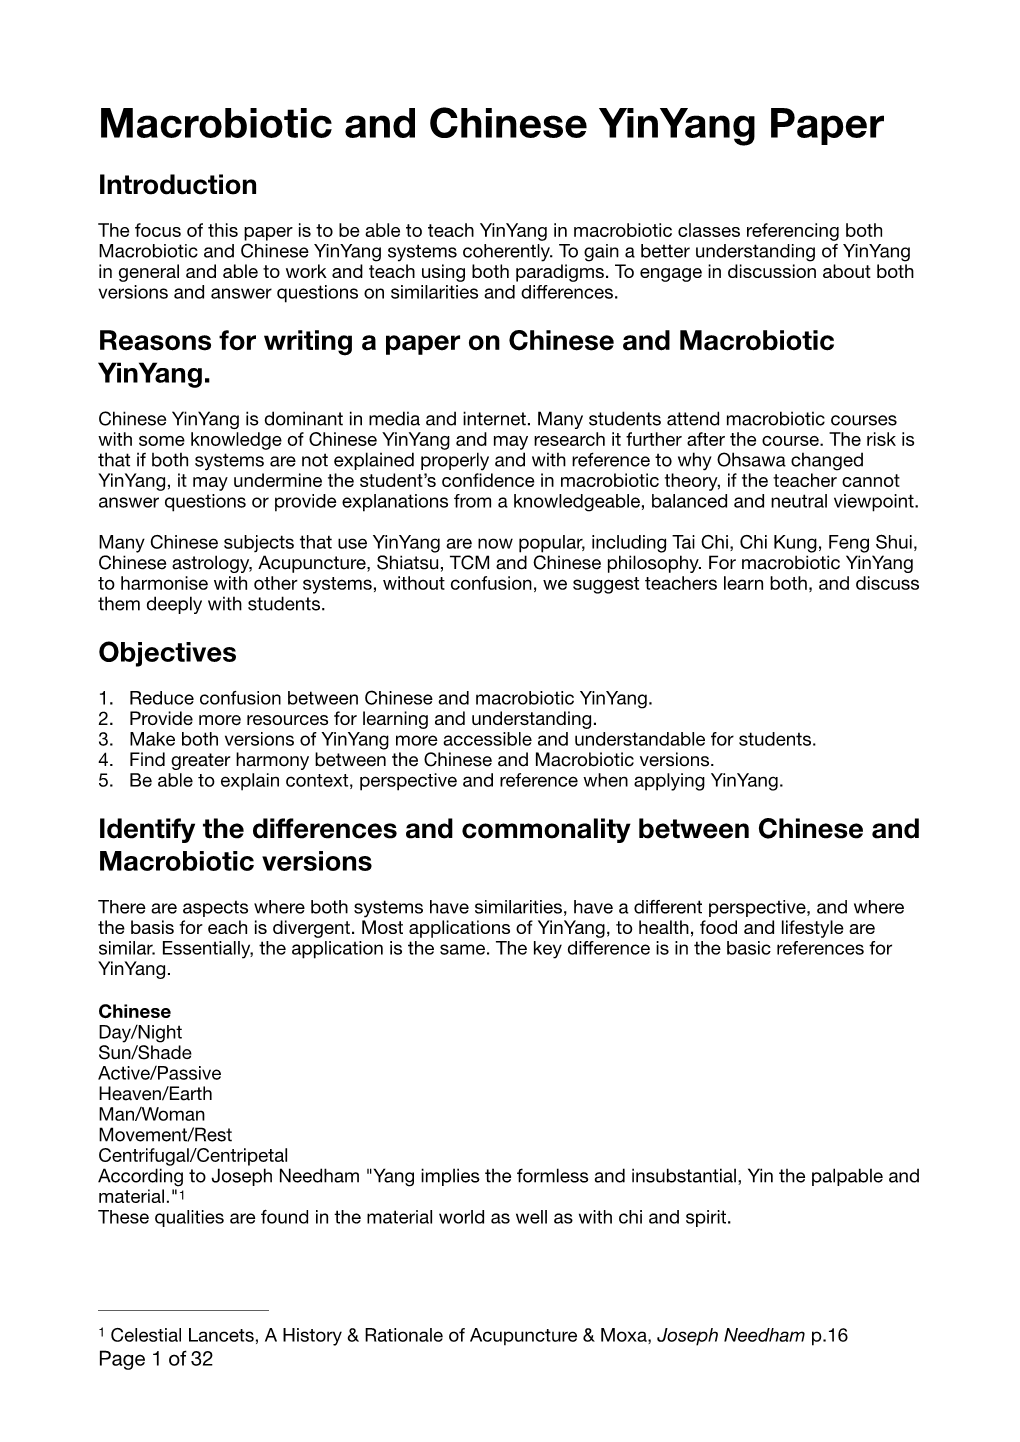 Macrobiotic and Chinese Yinyang Paper Introduction